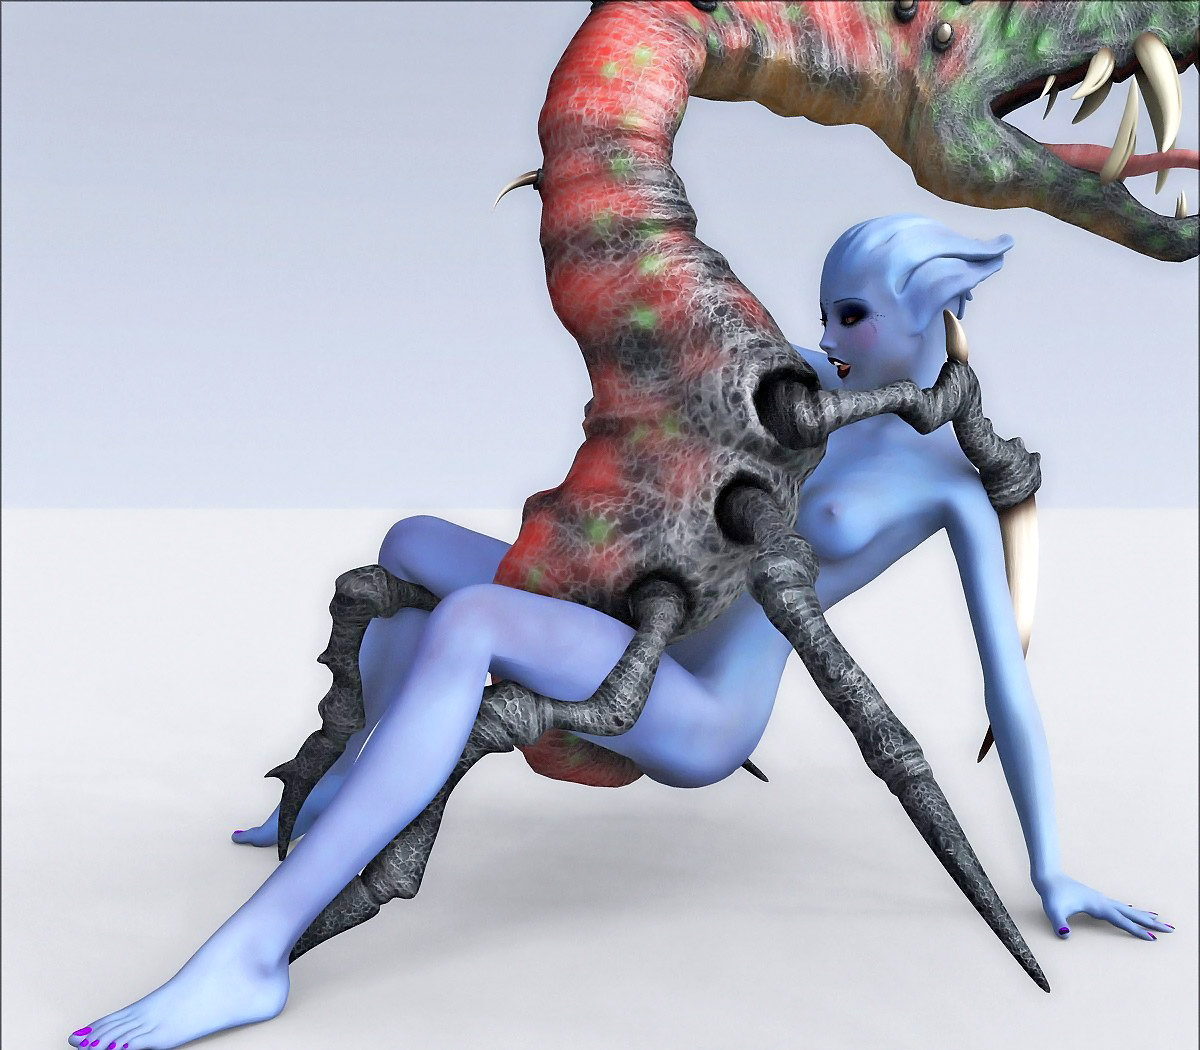 Insect 3d Porn Animated - chick takes on big insect during 3d cartoon monster sex | 3dwerewolfporn.com